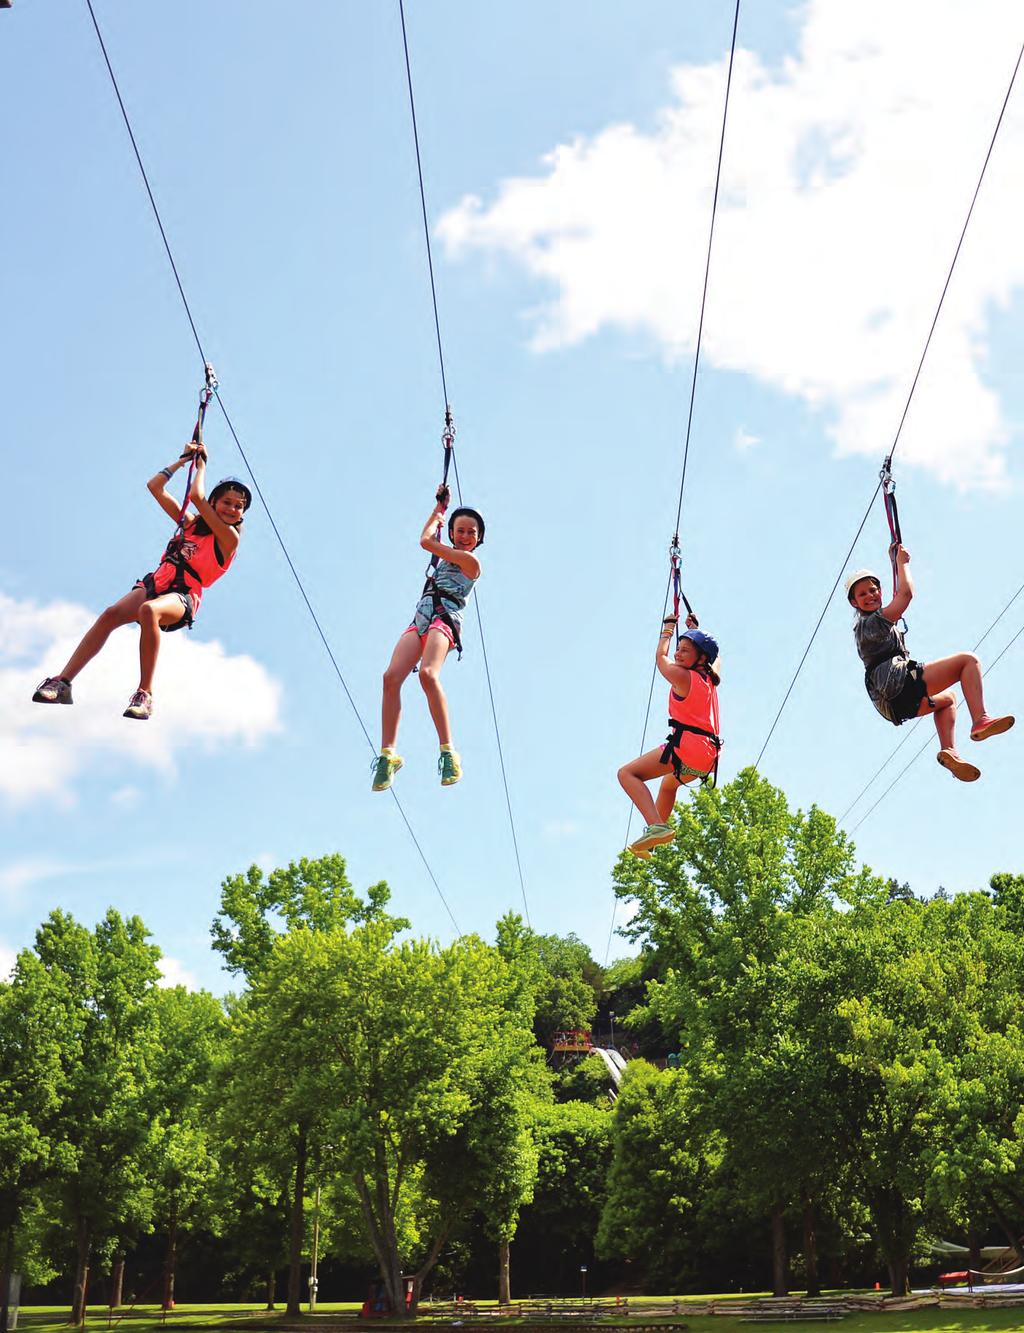 Here comes the fun! From flying down the zip line to bouncing off the blob, every day at Kanakuk is action packed and full of fun! Sports and Activities This will be a summer your Kamper won t forget!